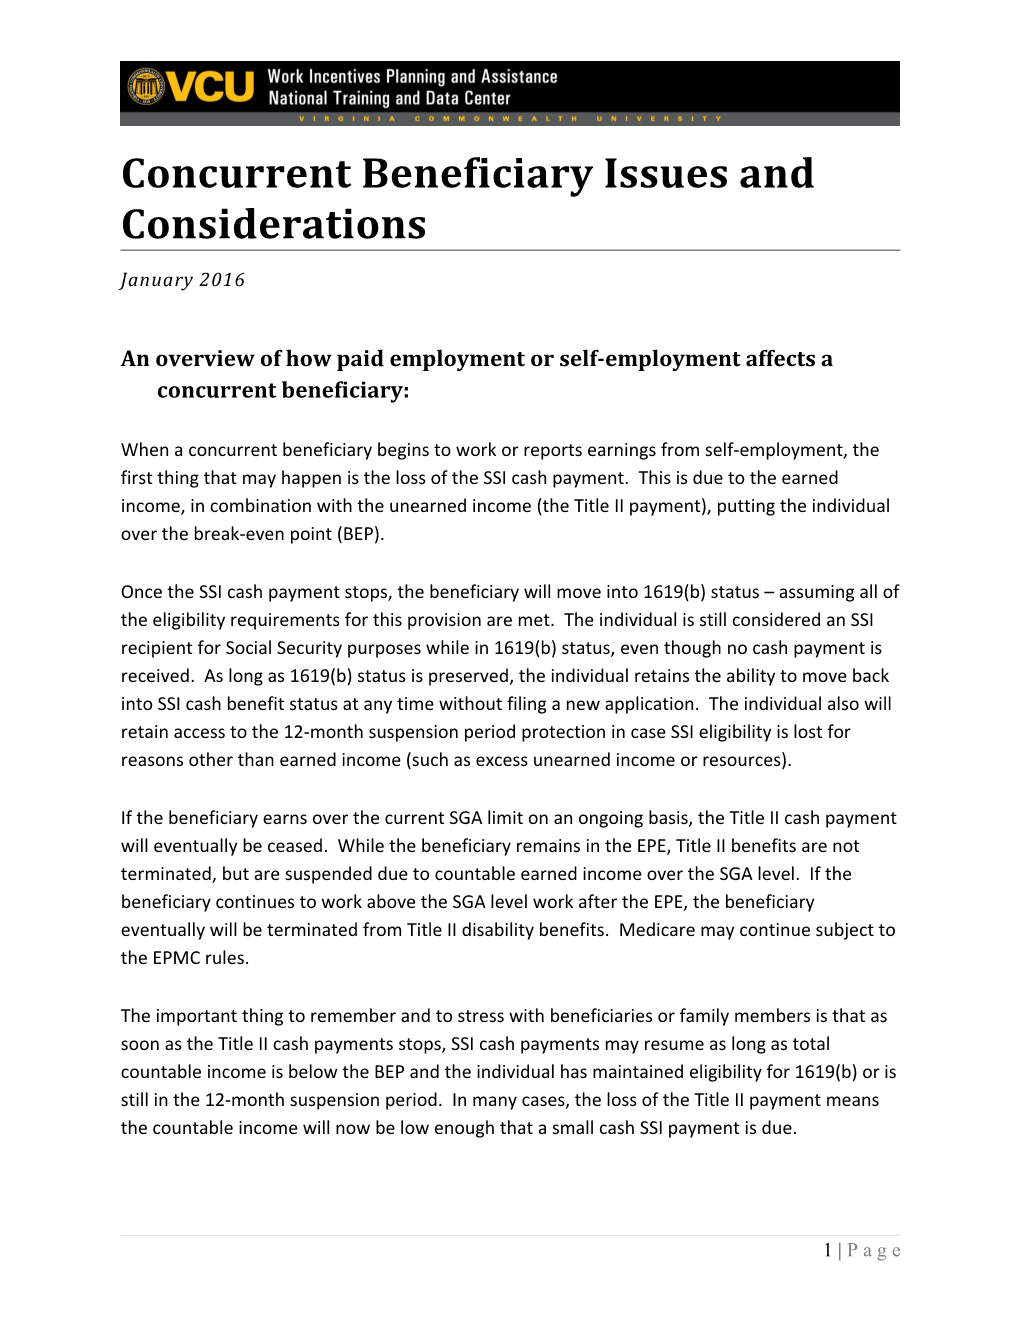 Concurrent Beneficiary Issues and Considerations